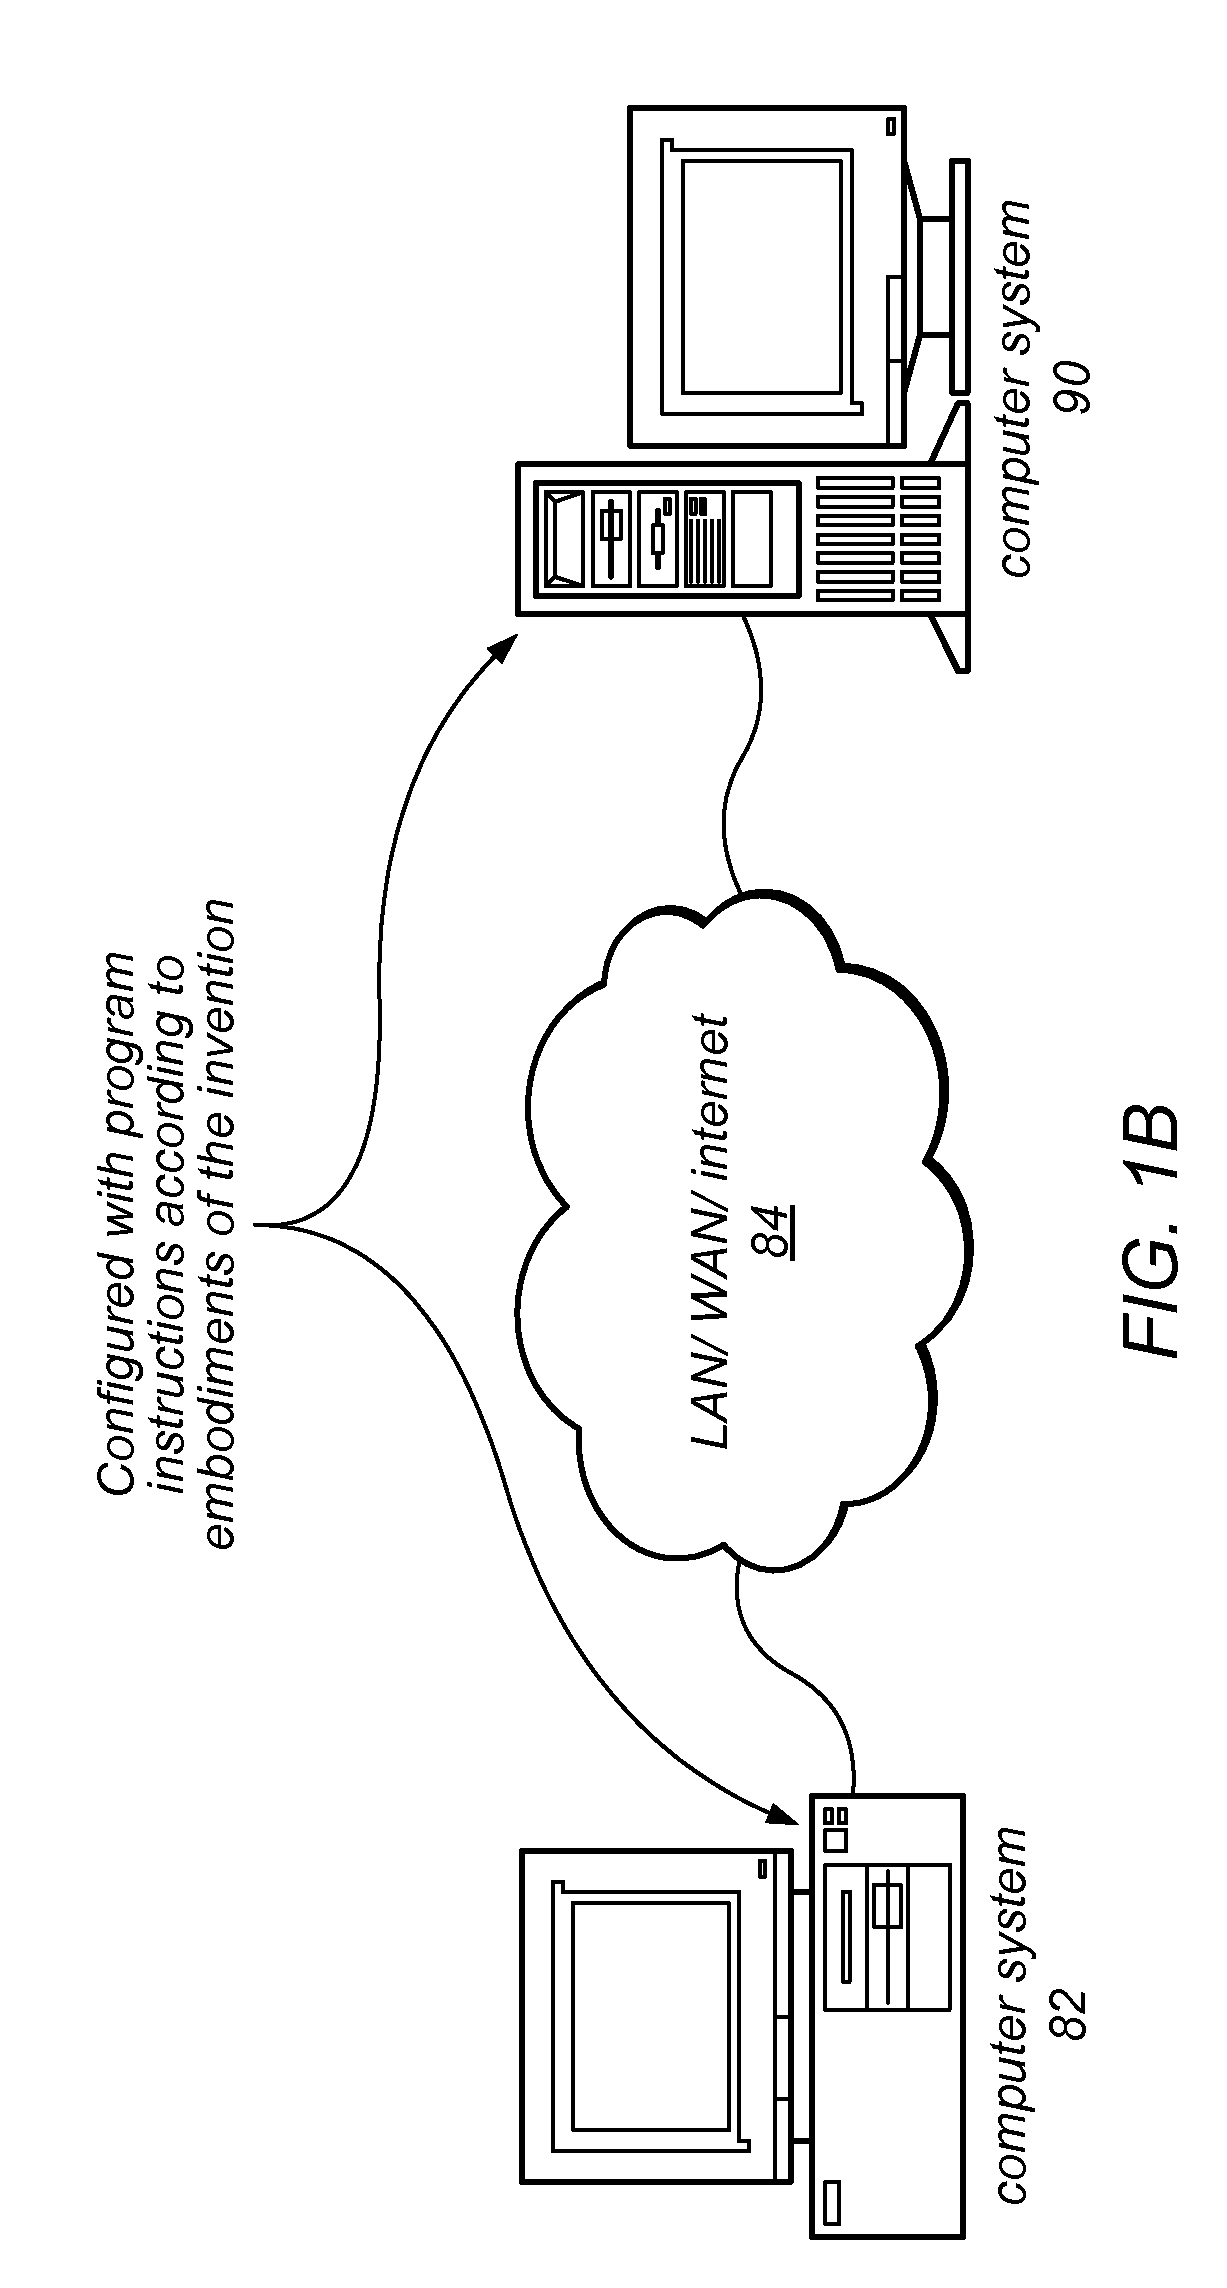 Conversion of a class oriented data flow program with inheritance to a structure oriented data flow program